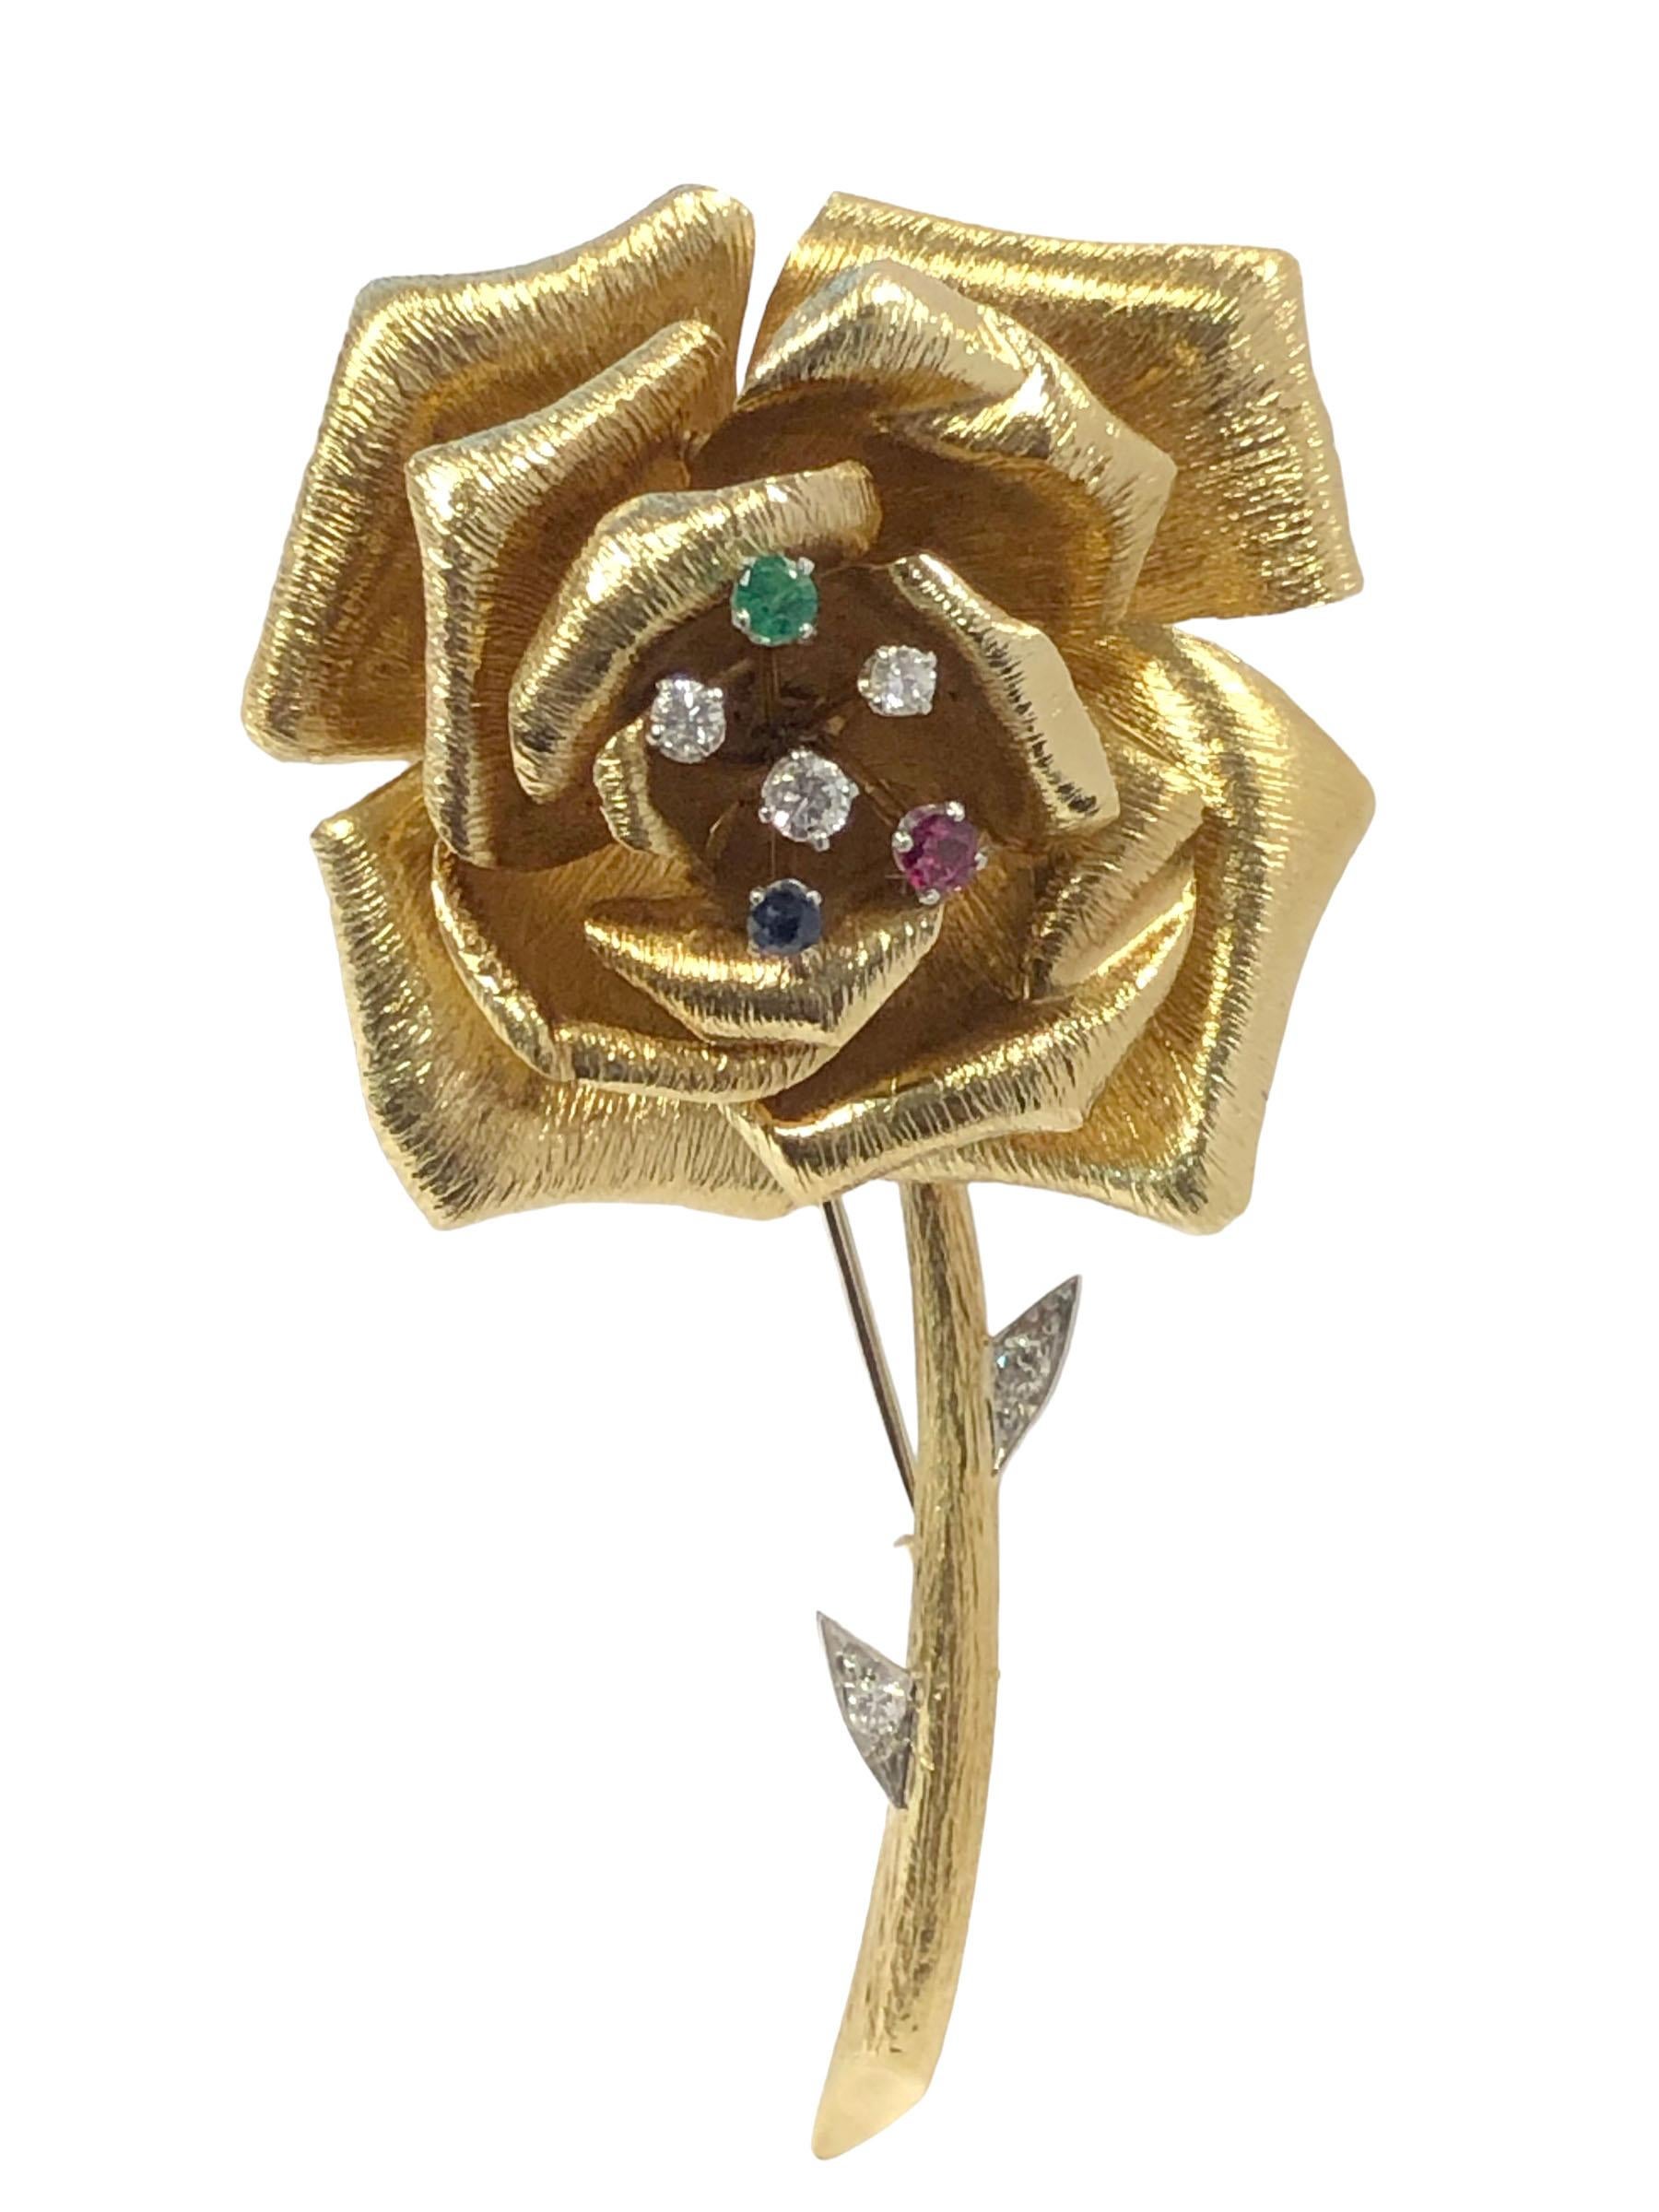 Circa 1970s David Webb 18k Yellow Gold Flower Clip Brooch, measuring 3 1/4 inches in length with the flower Portion measuring 2 inches in diameter and weighing 34 Grams,  assembled in 3 sections with the inner portion of the flower being slightly